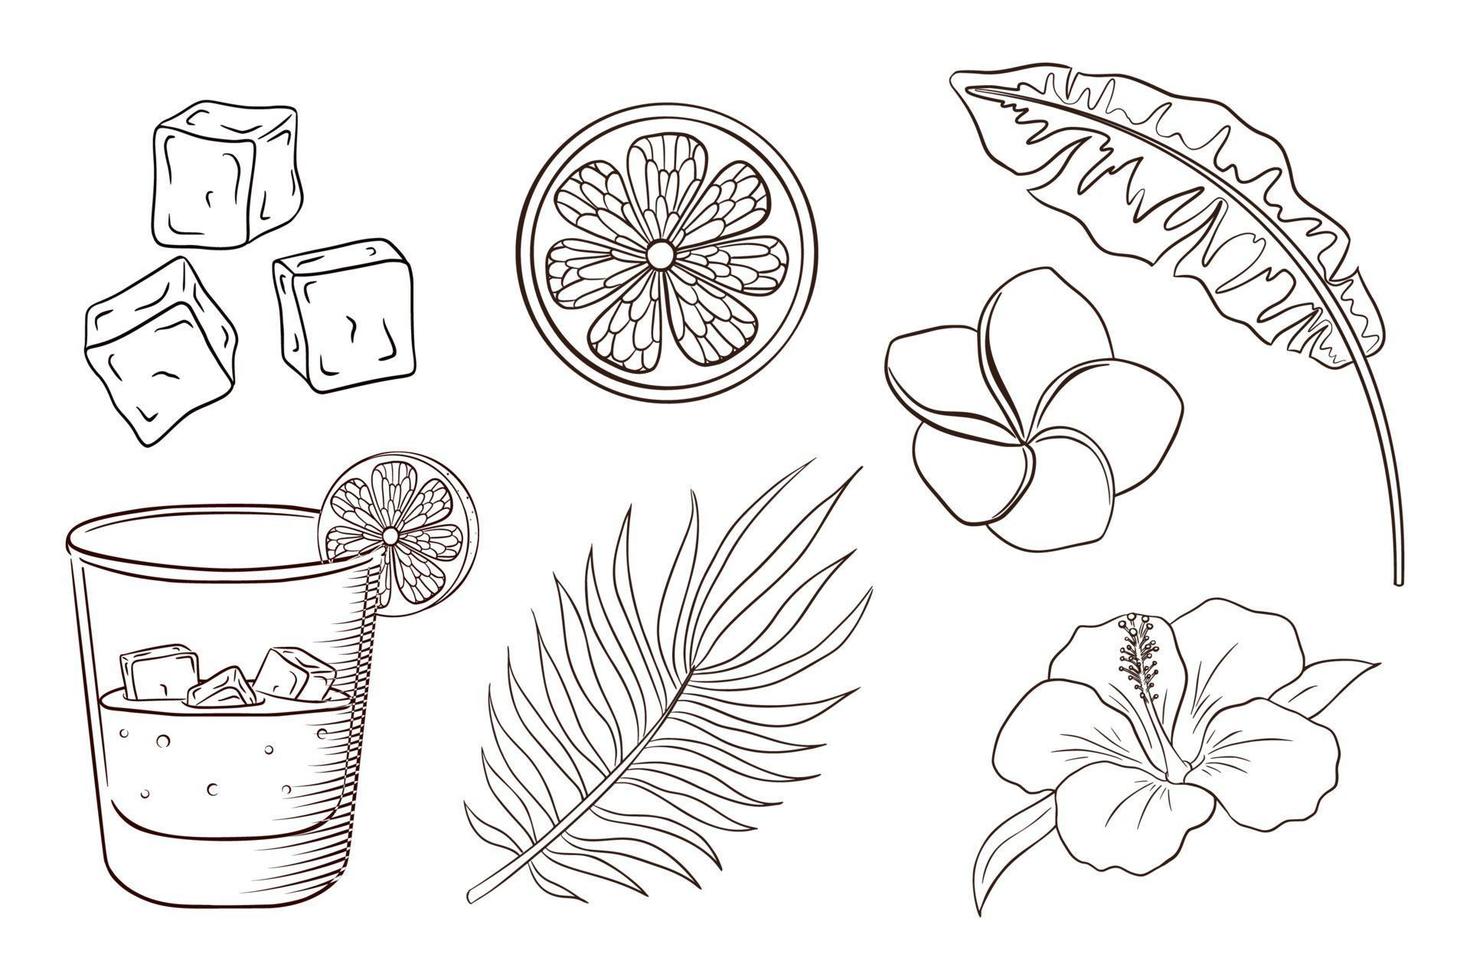 Whiskey and Soda Cocktail, Tropical Flowers and Leaves Coloring Page vector